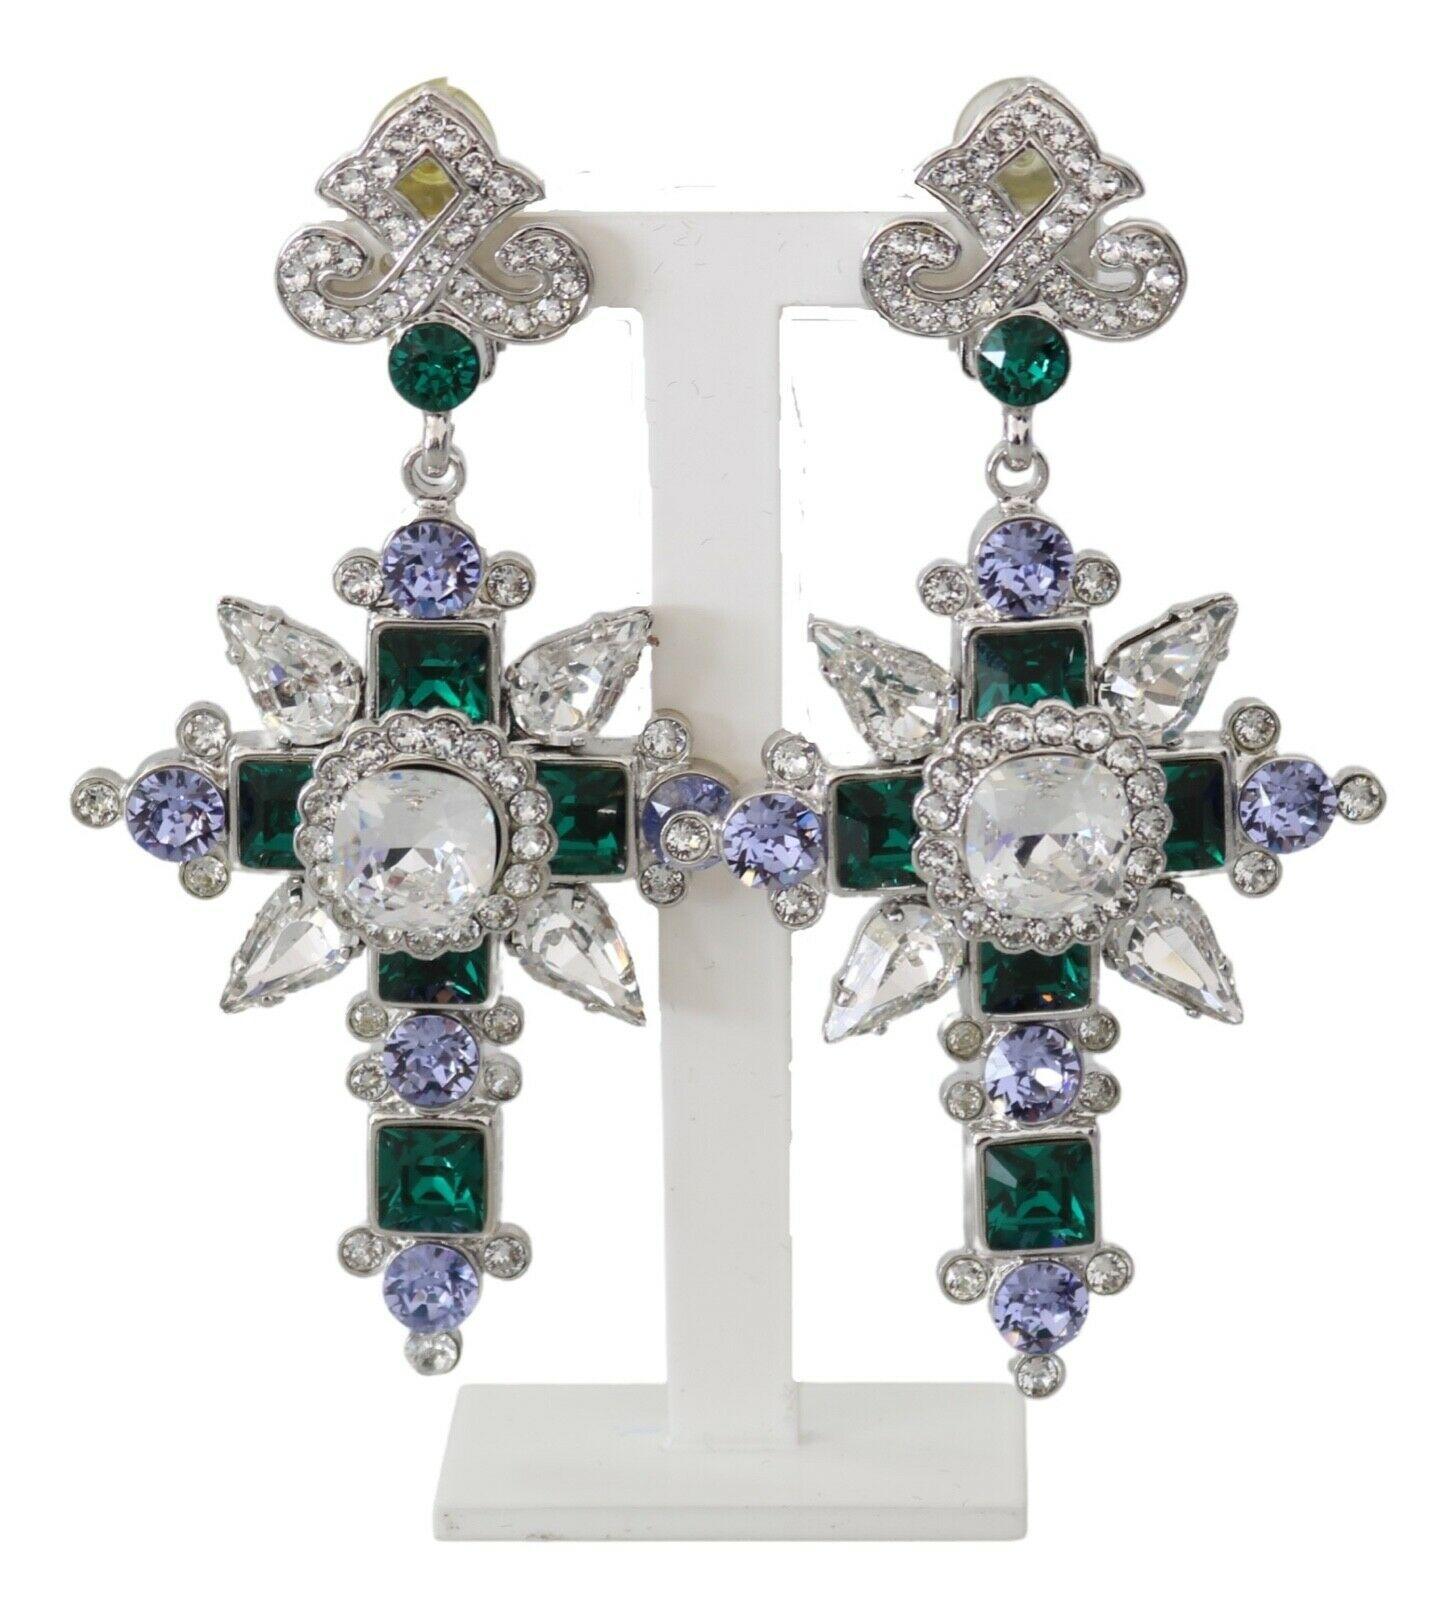 Gorgeous brand new with tags, 100% Authentic Dolce & Gabbana earrings.




Model: Clip-on, dangling
Motive: Filigree, cross
Material: 50% Brass, 50% Crystal

Color: Silver
Logo details
Made in Italy

Length: 8cm

Dolce & Gabbana box, original tags